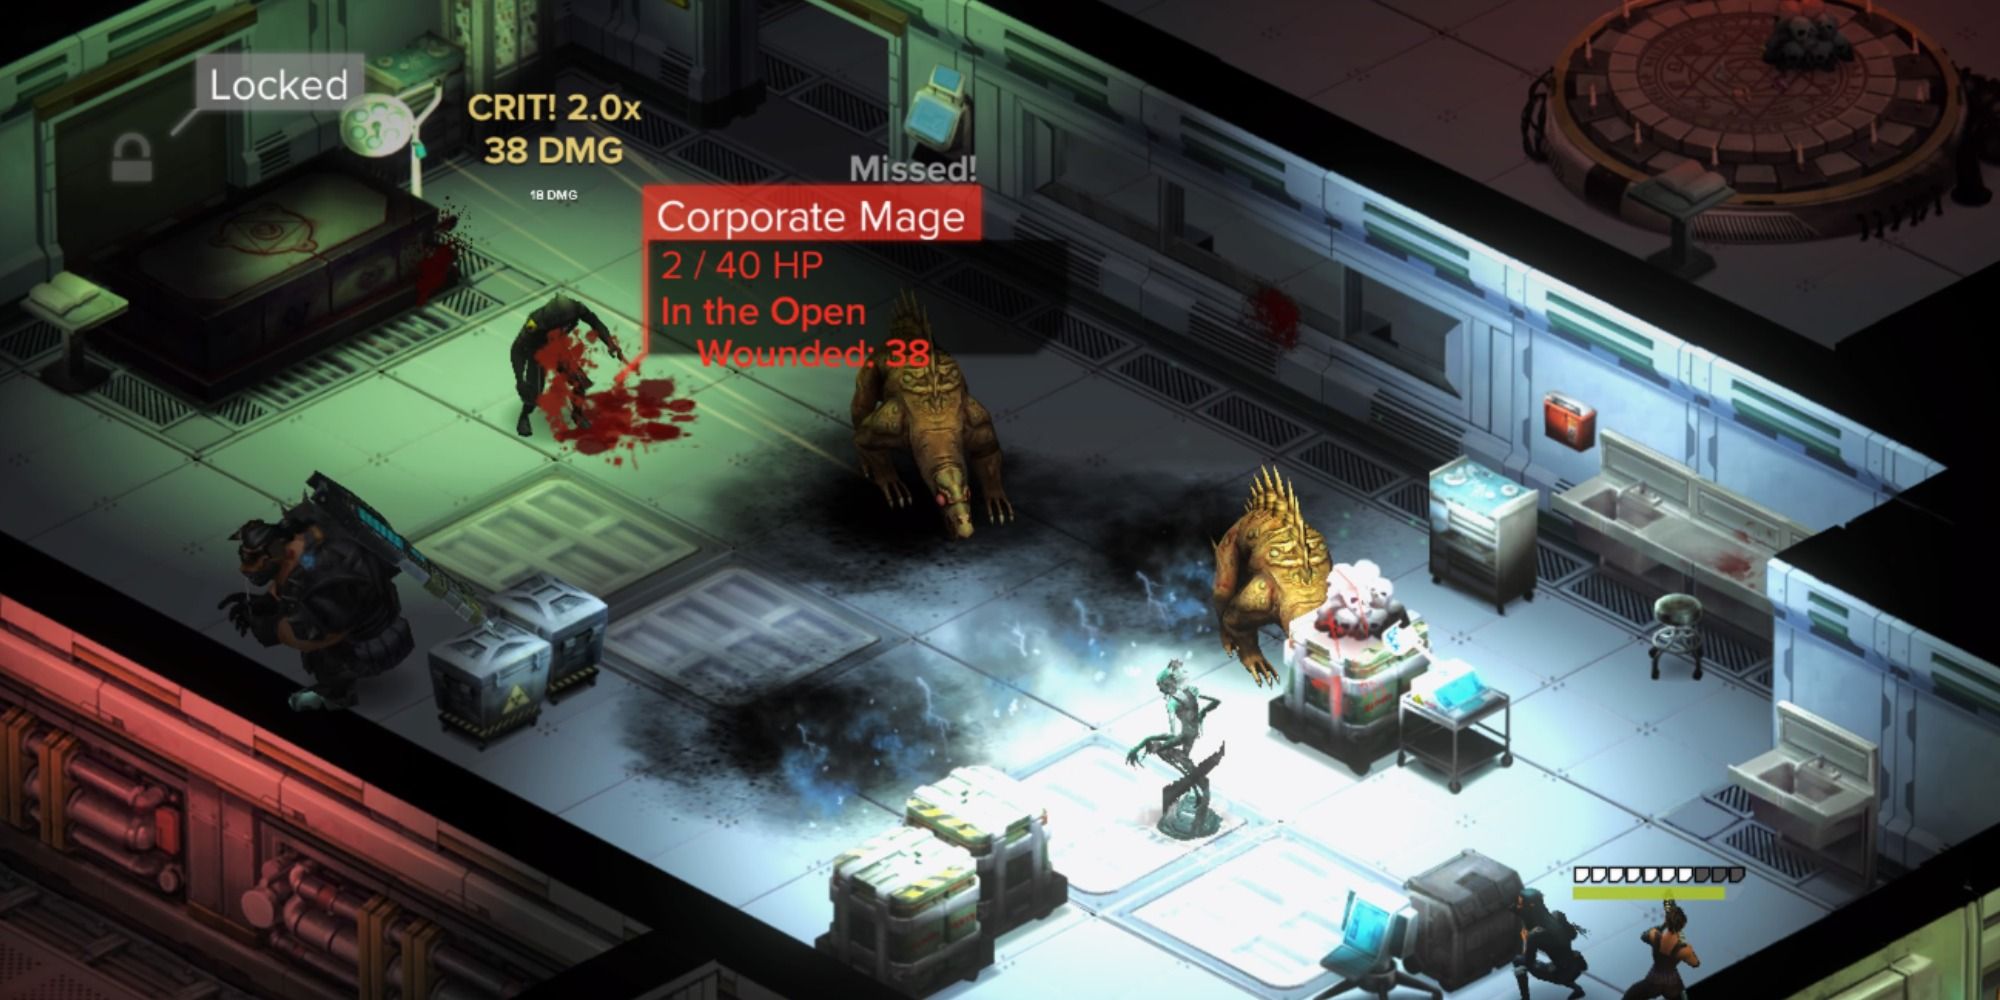 Shadowrun Returns Shootout in a lab with magic beasts and a corporate mage